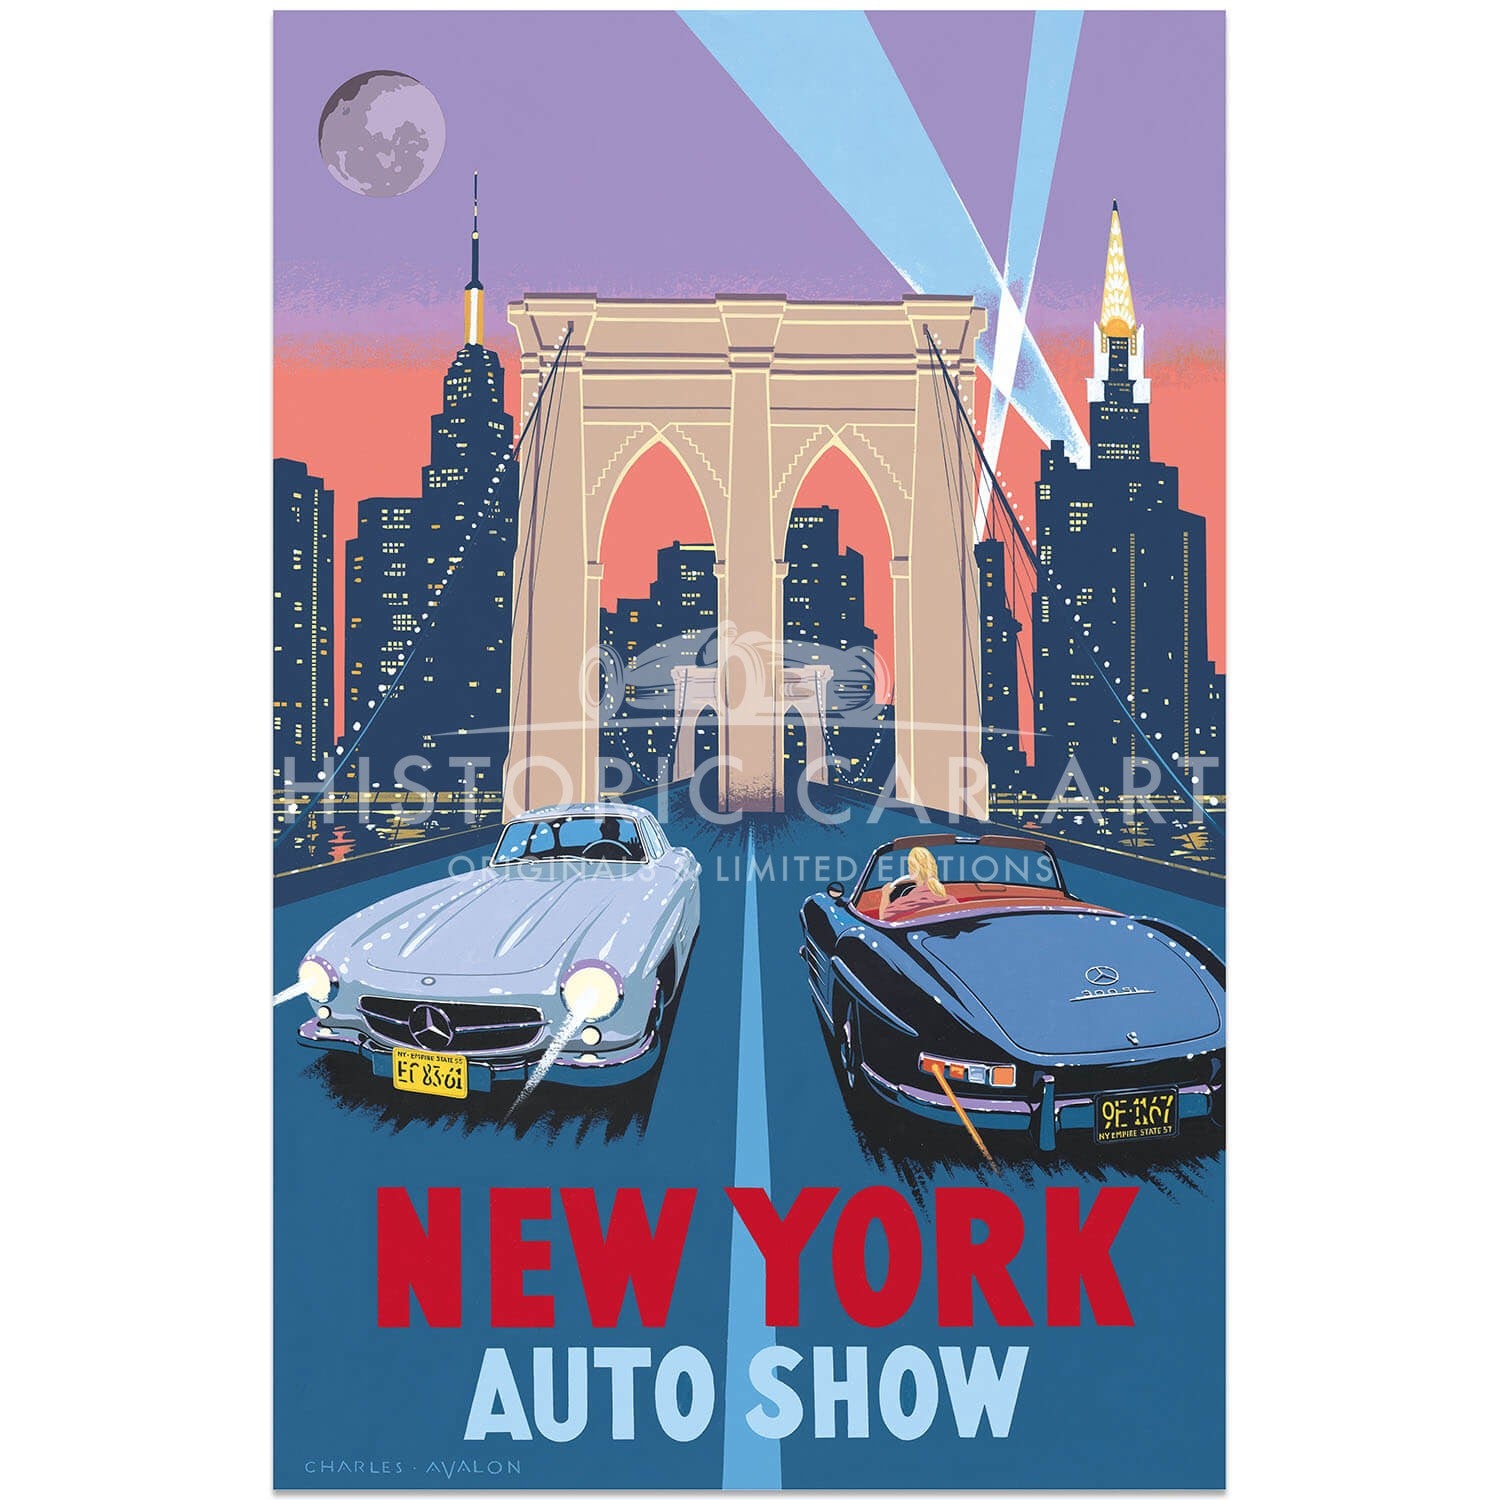 Mercedes 300 SL Gullwing and Roadster – New York Auto Show  | Poster